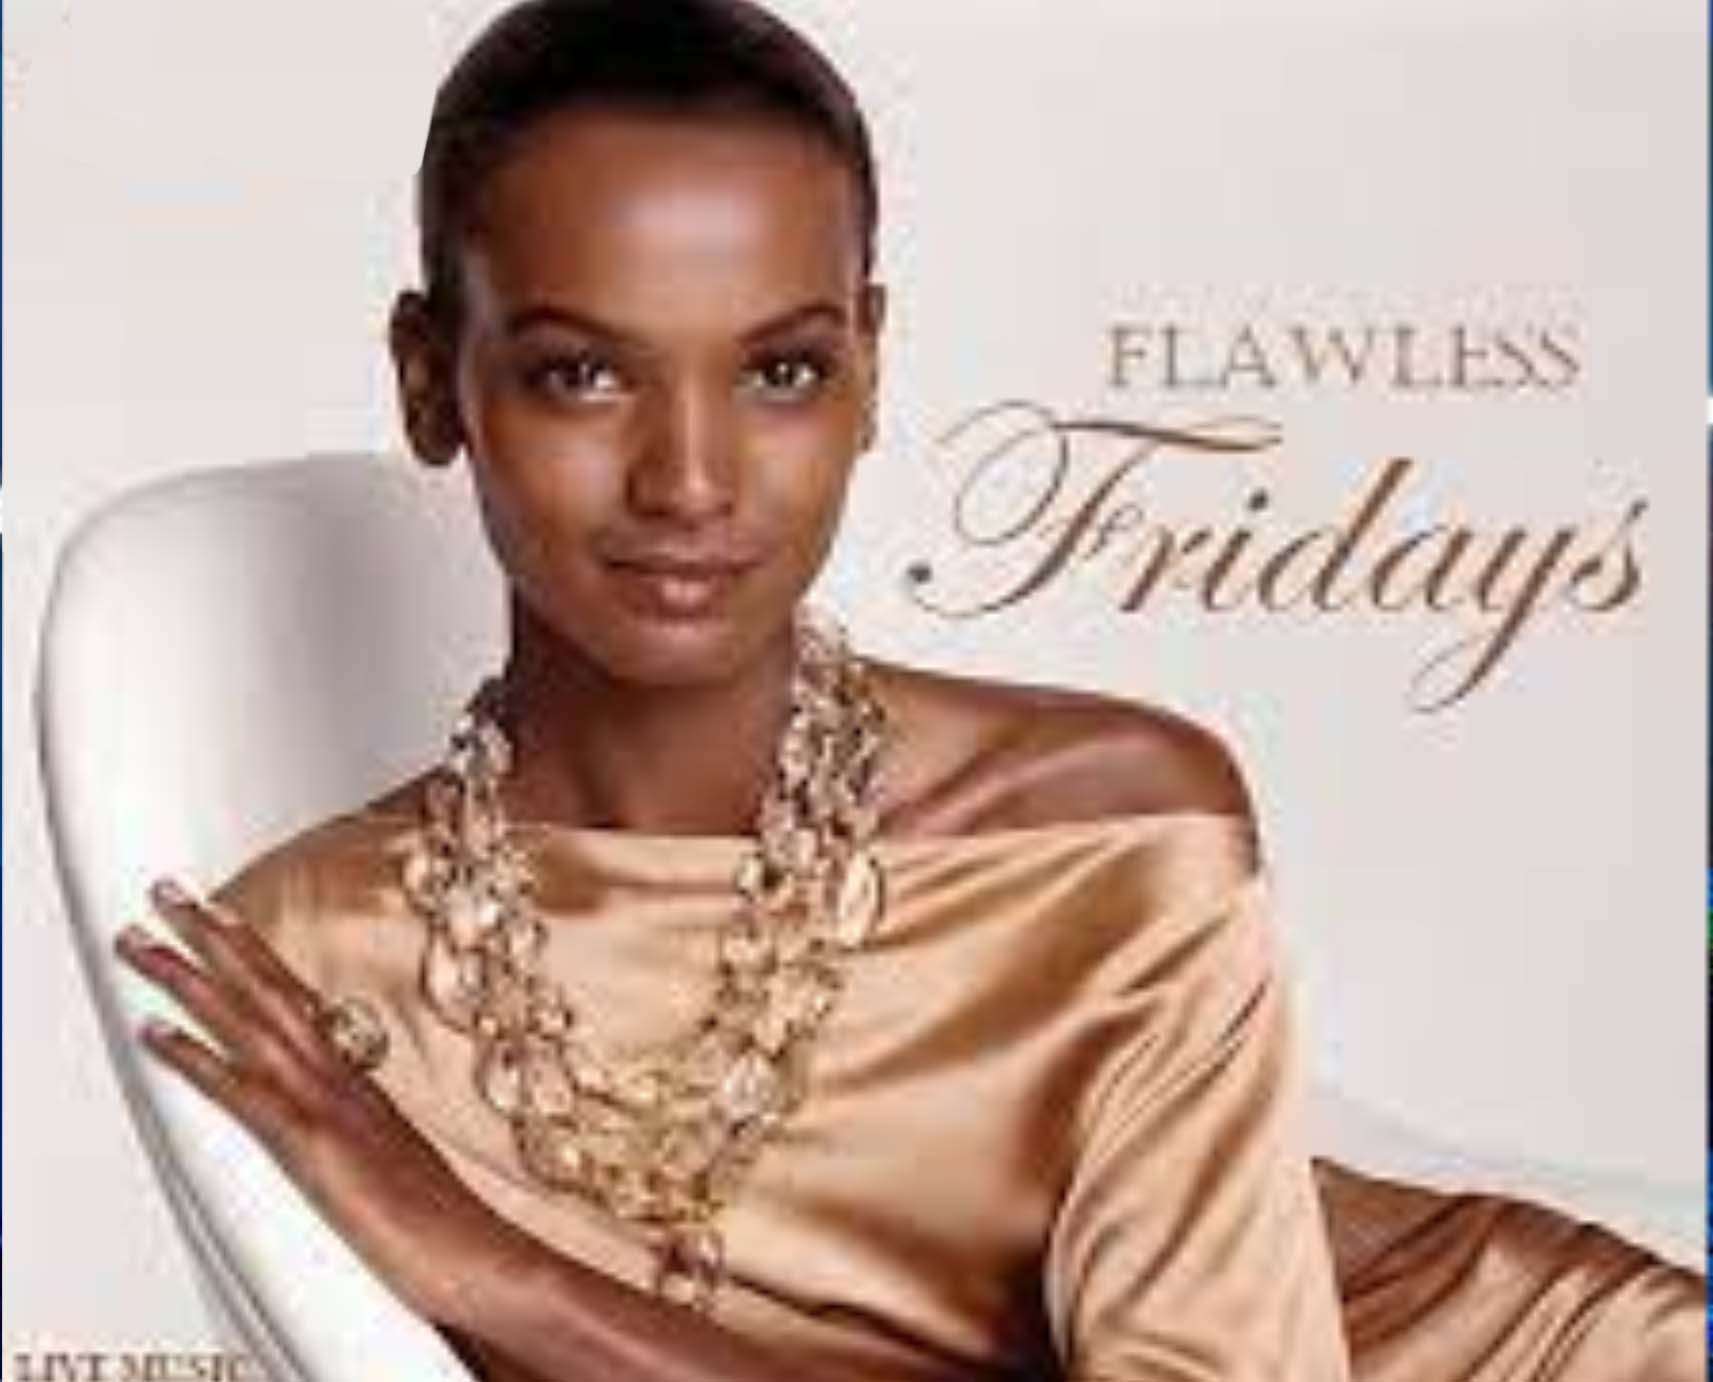 FLAWLESS FRIDAYS Mature Adults & Grownfolks R&B JAZZ weekly soiree